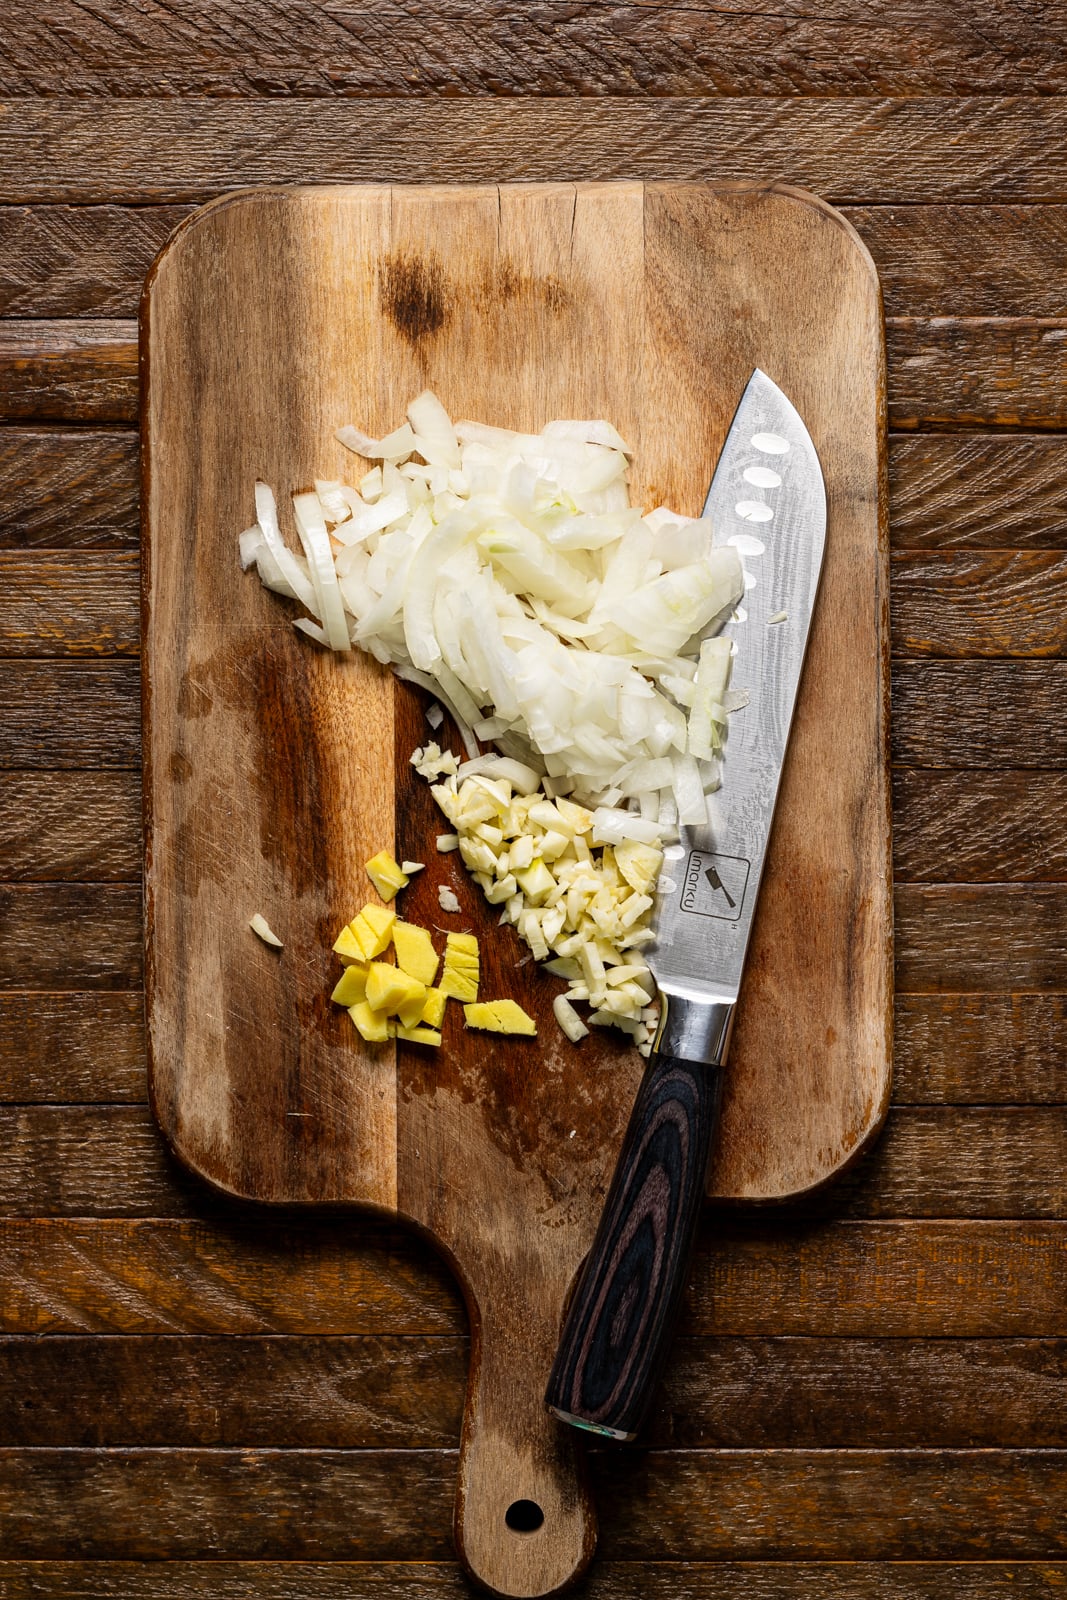 Chopped onions, garlic, and ginger on a cutting board with a knife.